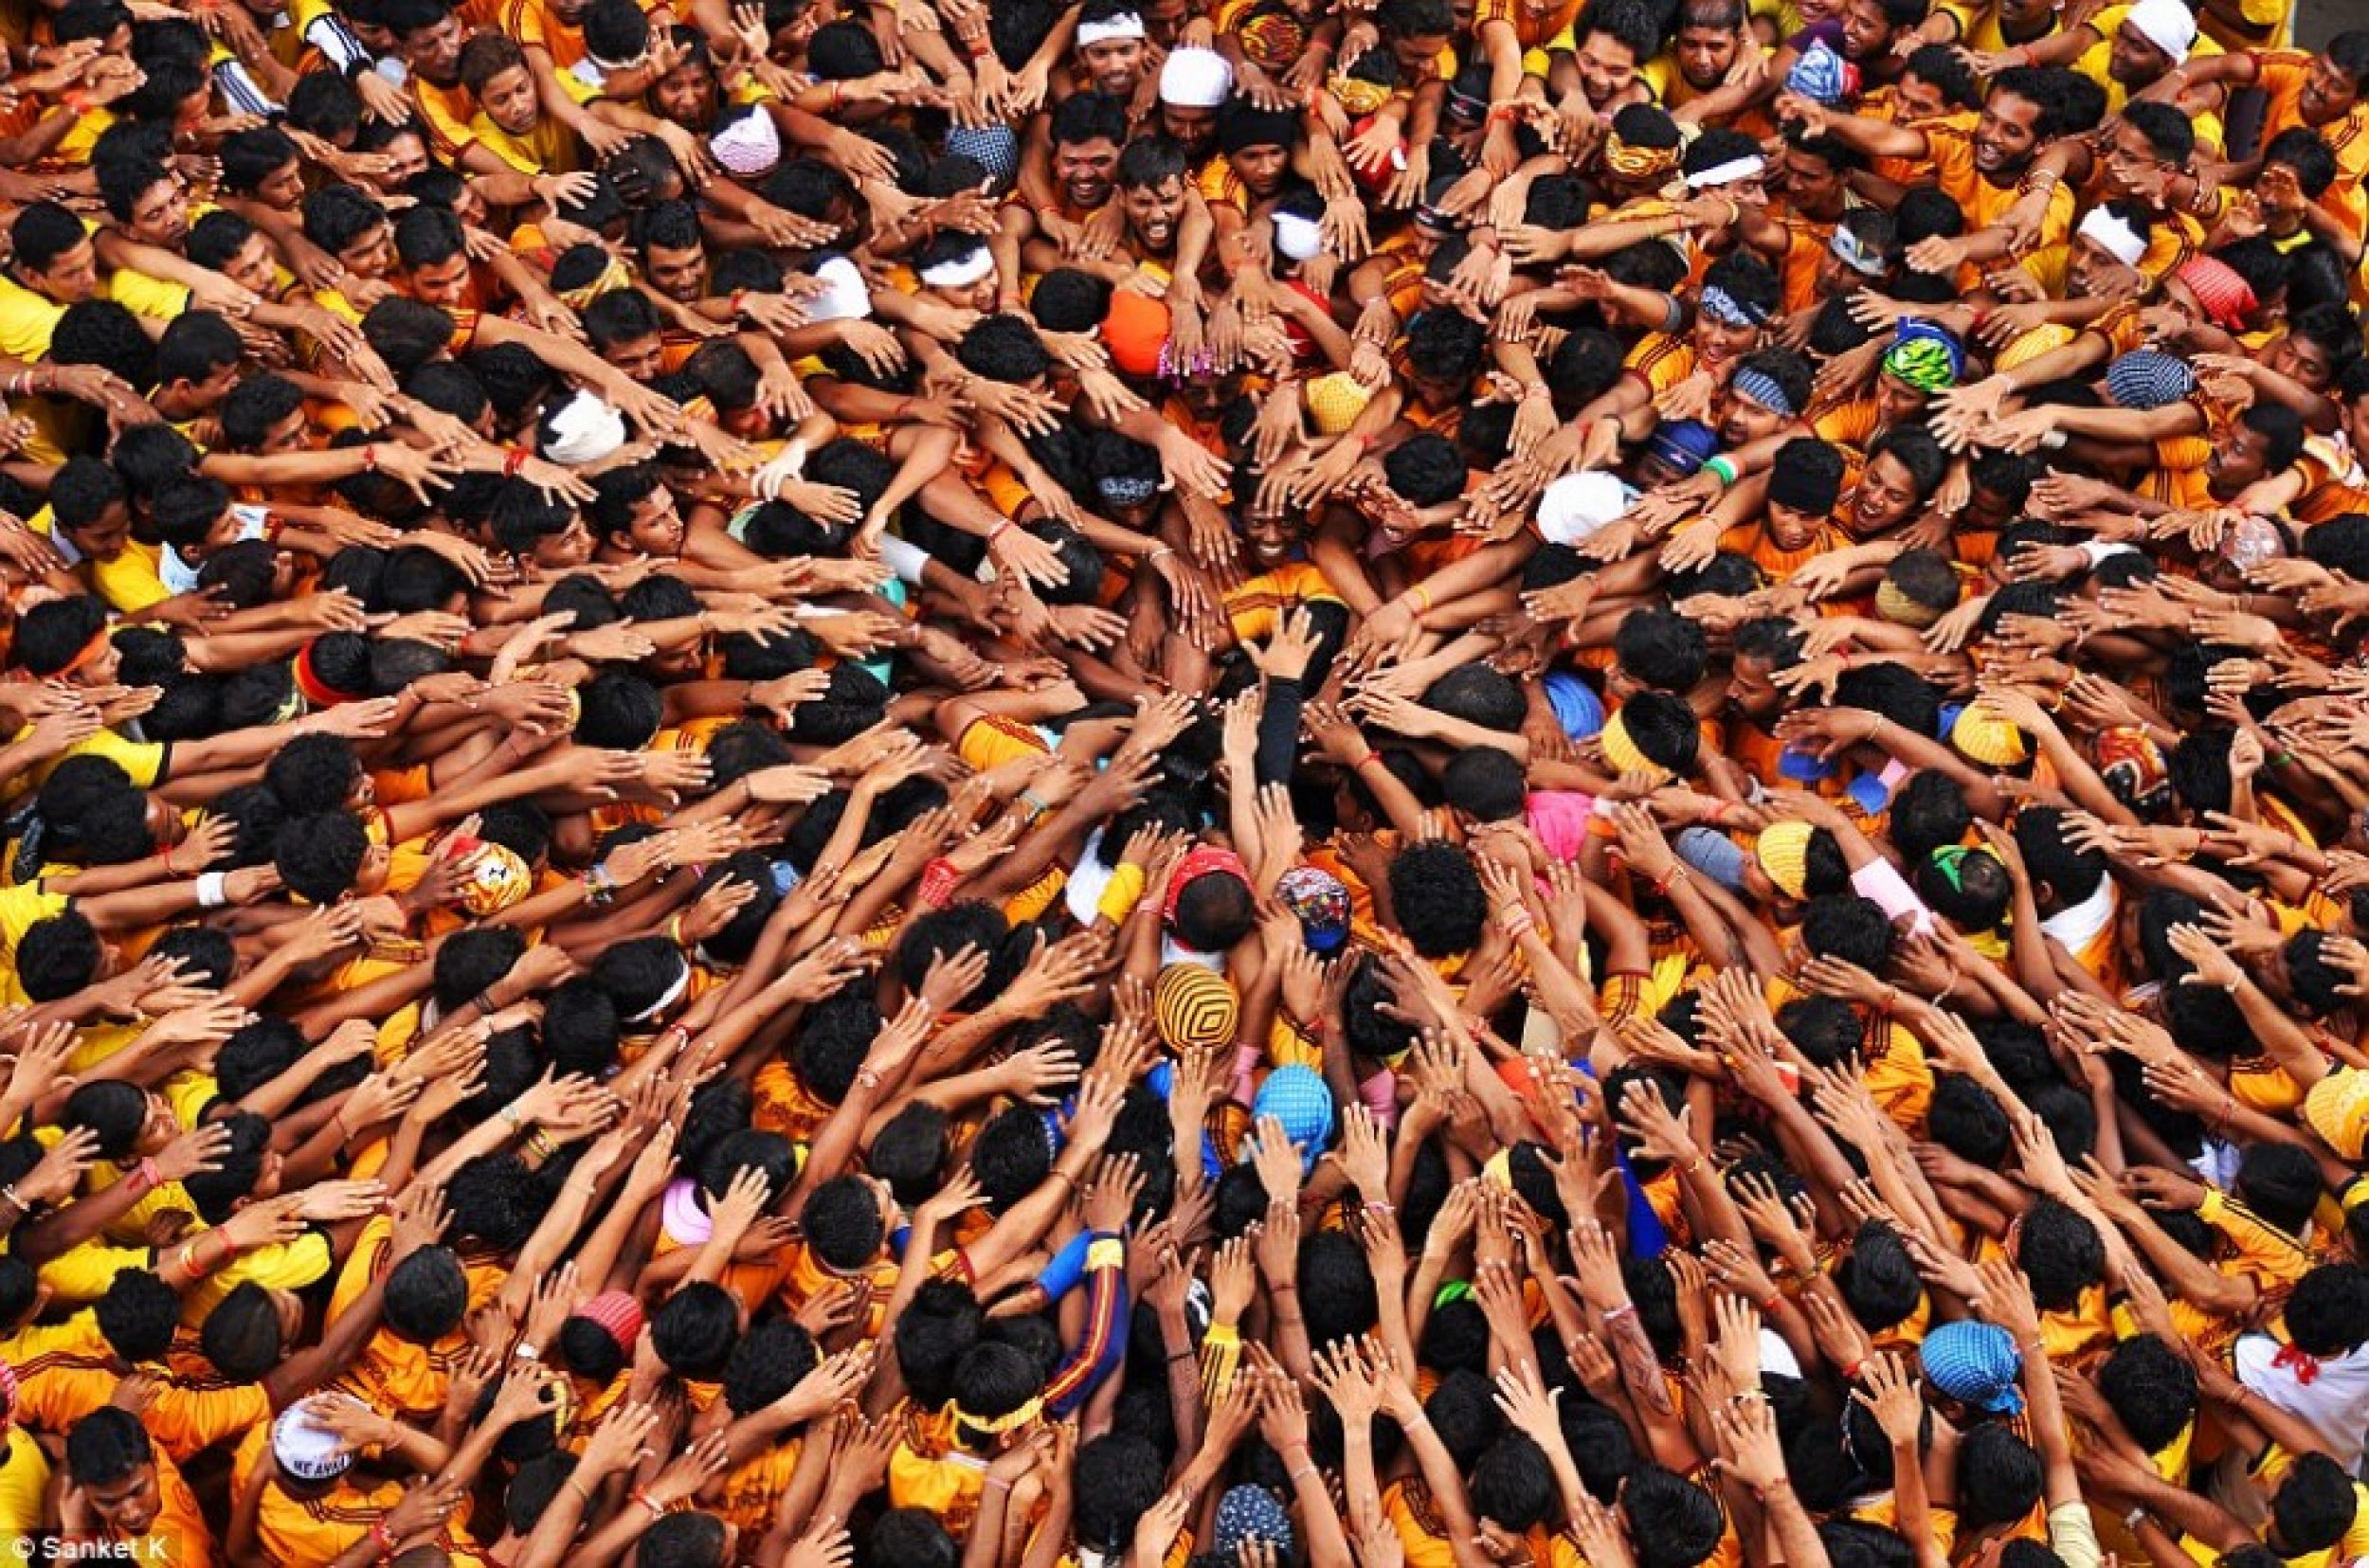 A sea of arms makes up this well-composed image taken as people celebrate during the Indian Festival in Mumbai.